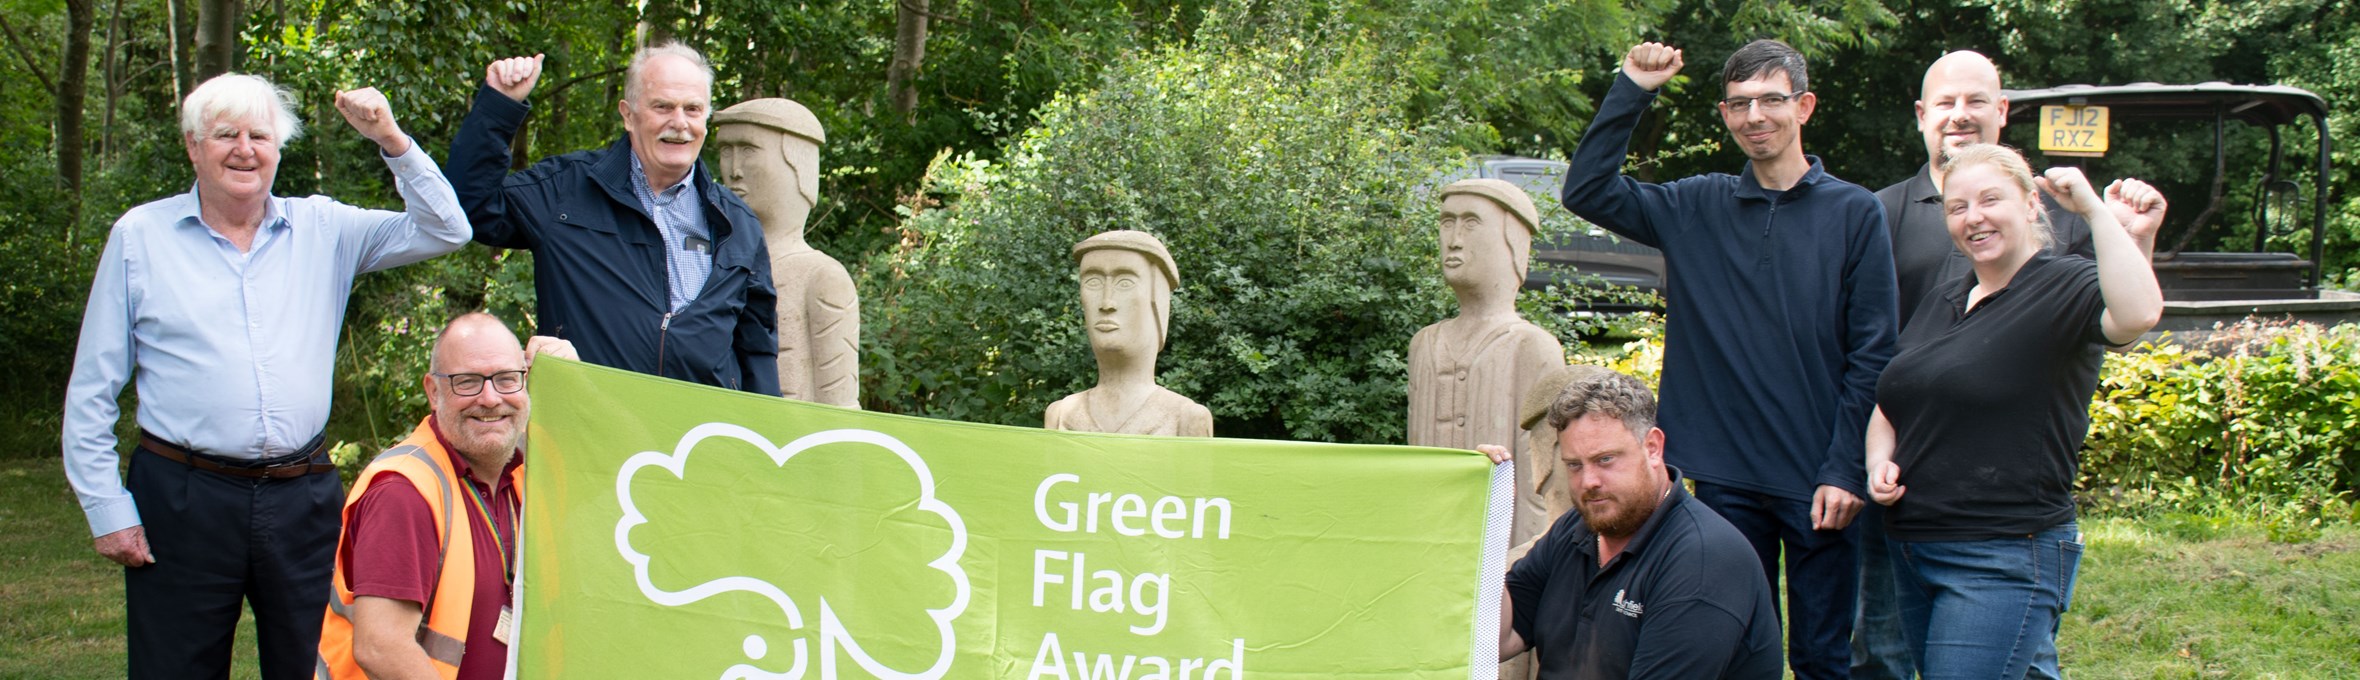 Members of the council showing off the Green flag at the Brierley Forest Park miners mural.